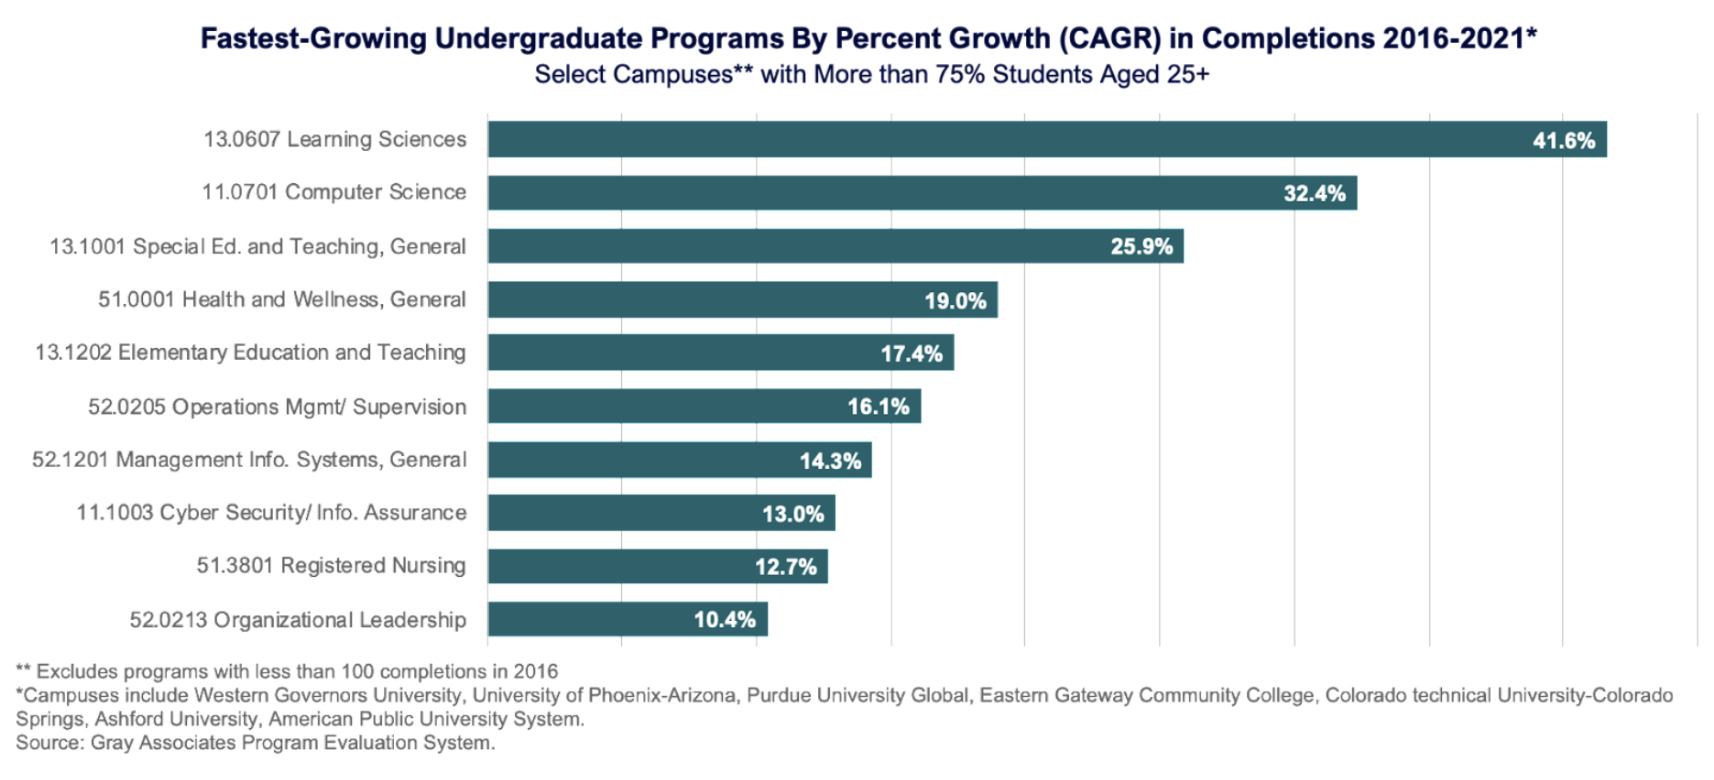 Fastest-Growing Undergraduate Programs By Percent Growth (CAGR) in Completions 2016 - 2021* (Select Campuses** with More than 75% Students Aged 25+)